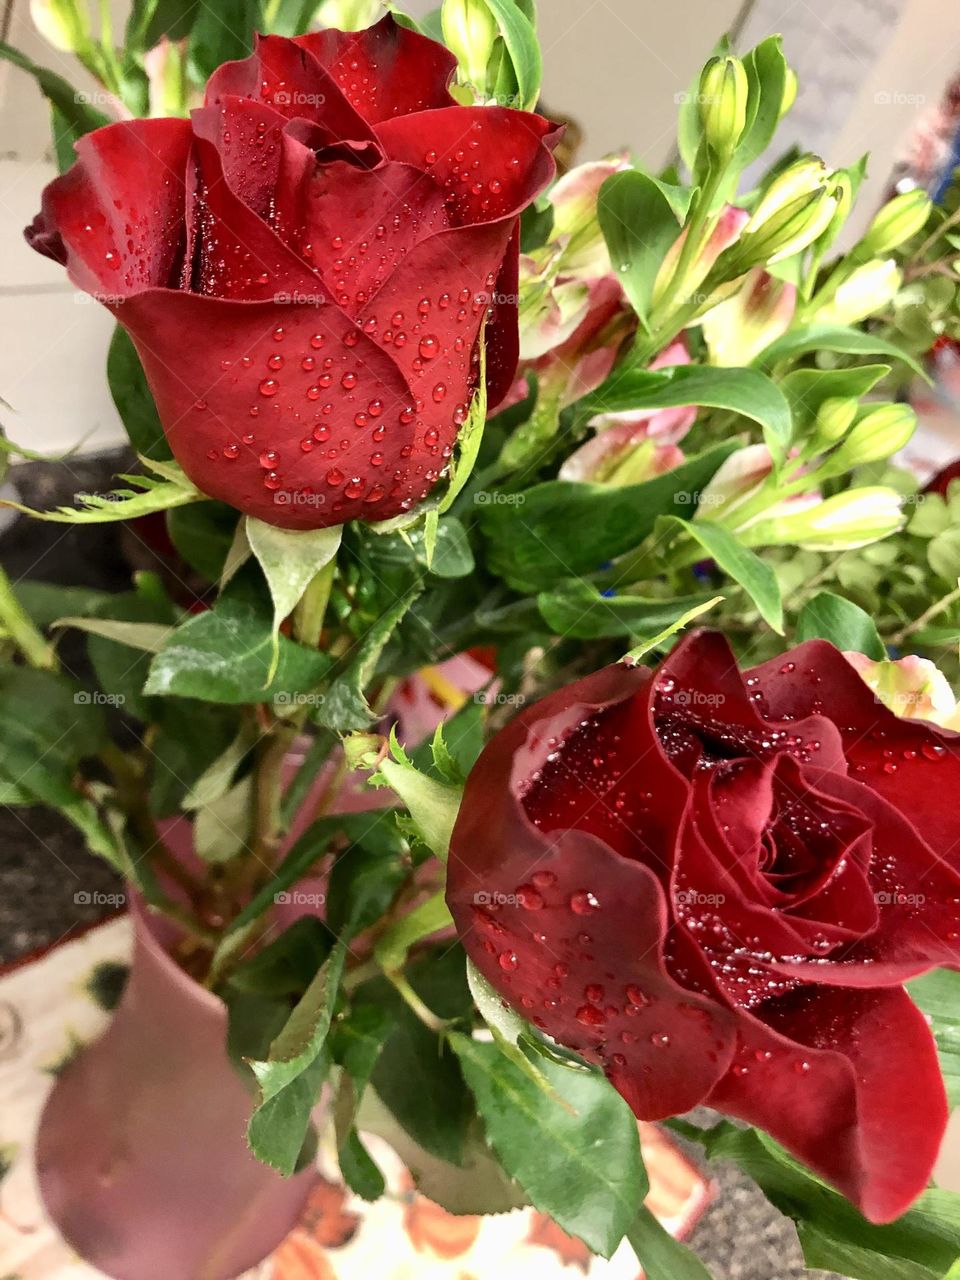 My flowers / close up to the red rose 🌹 buds 